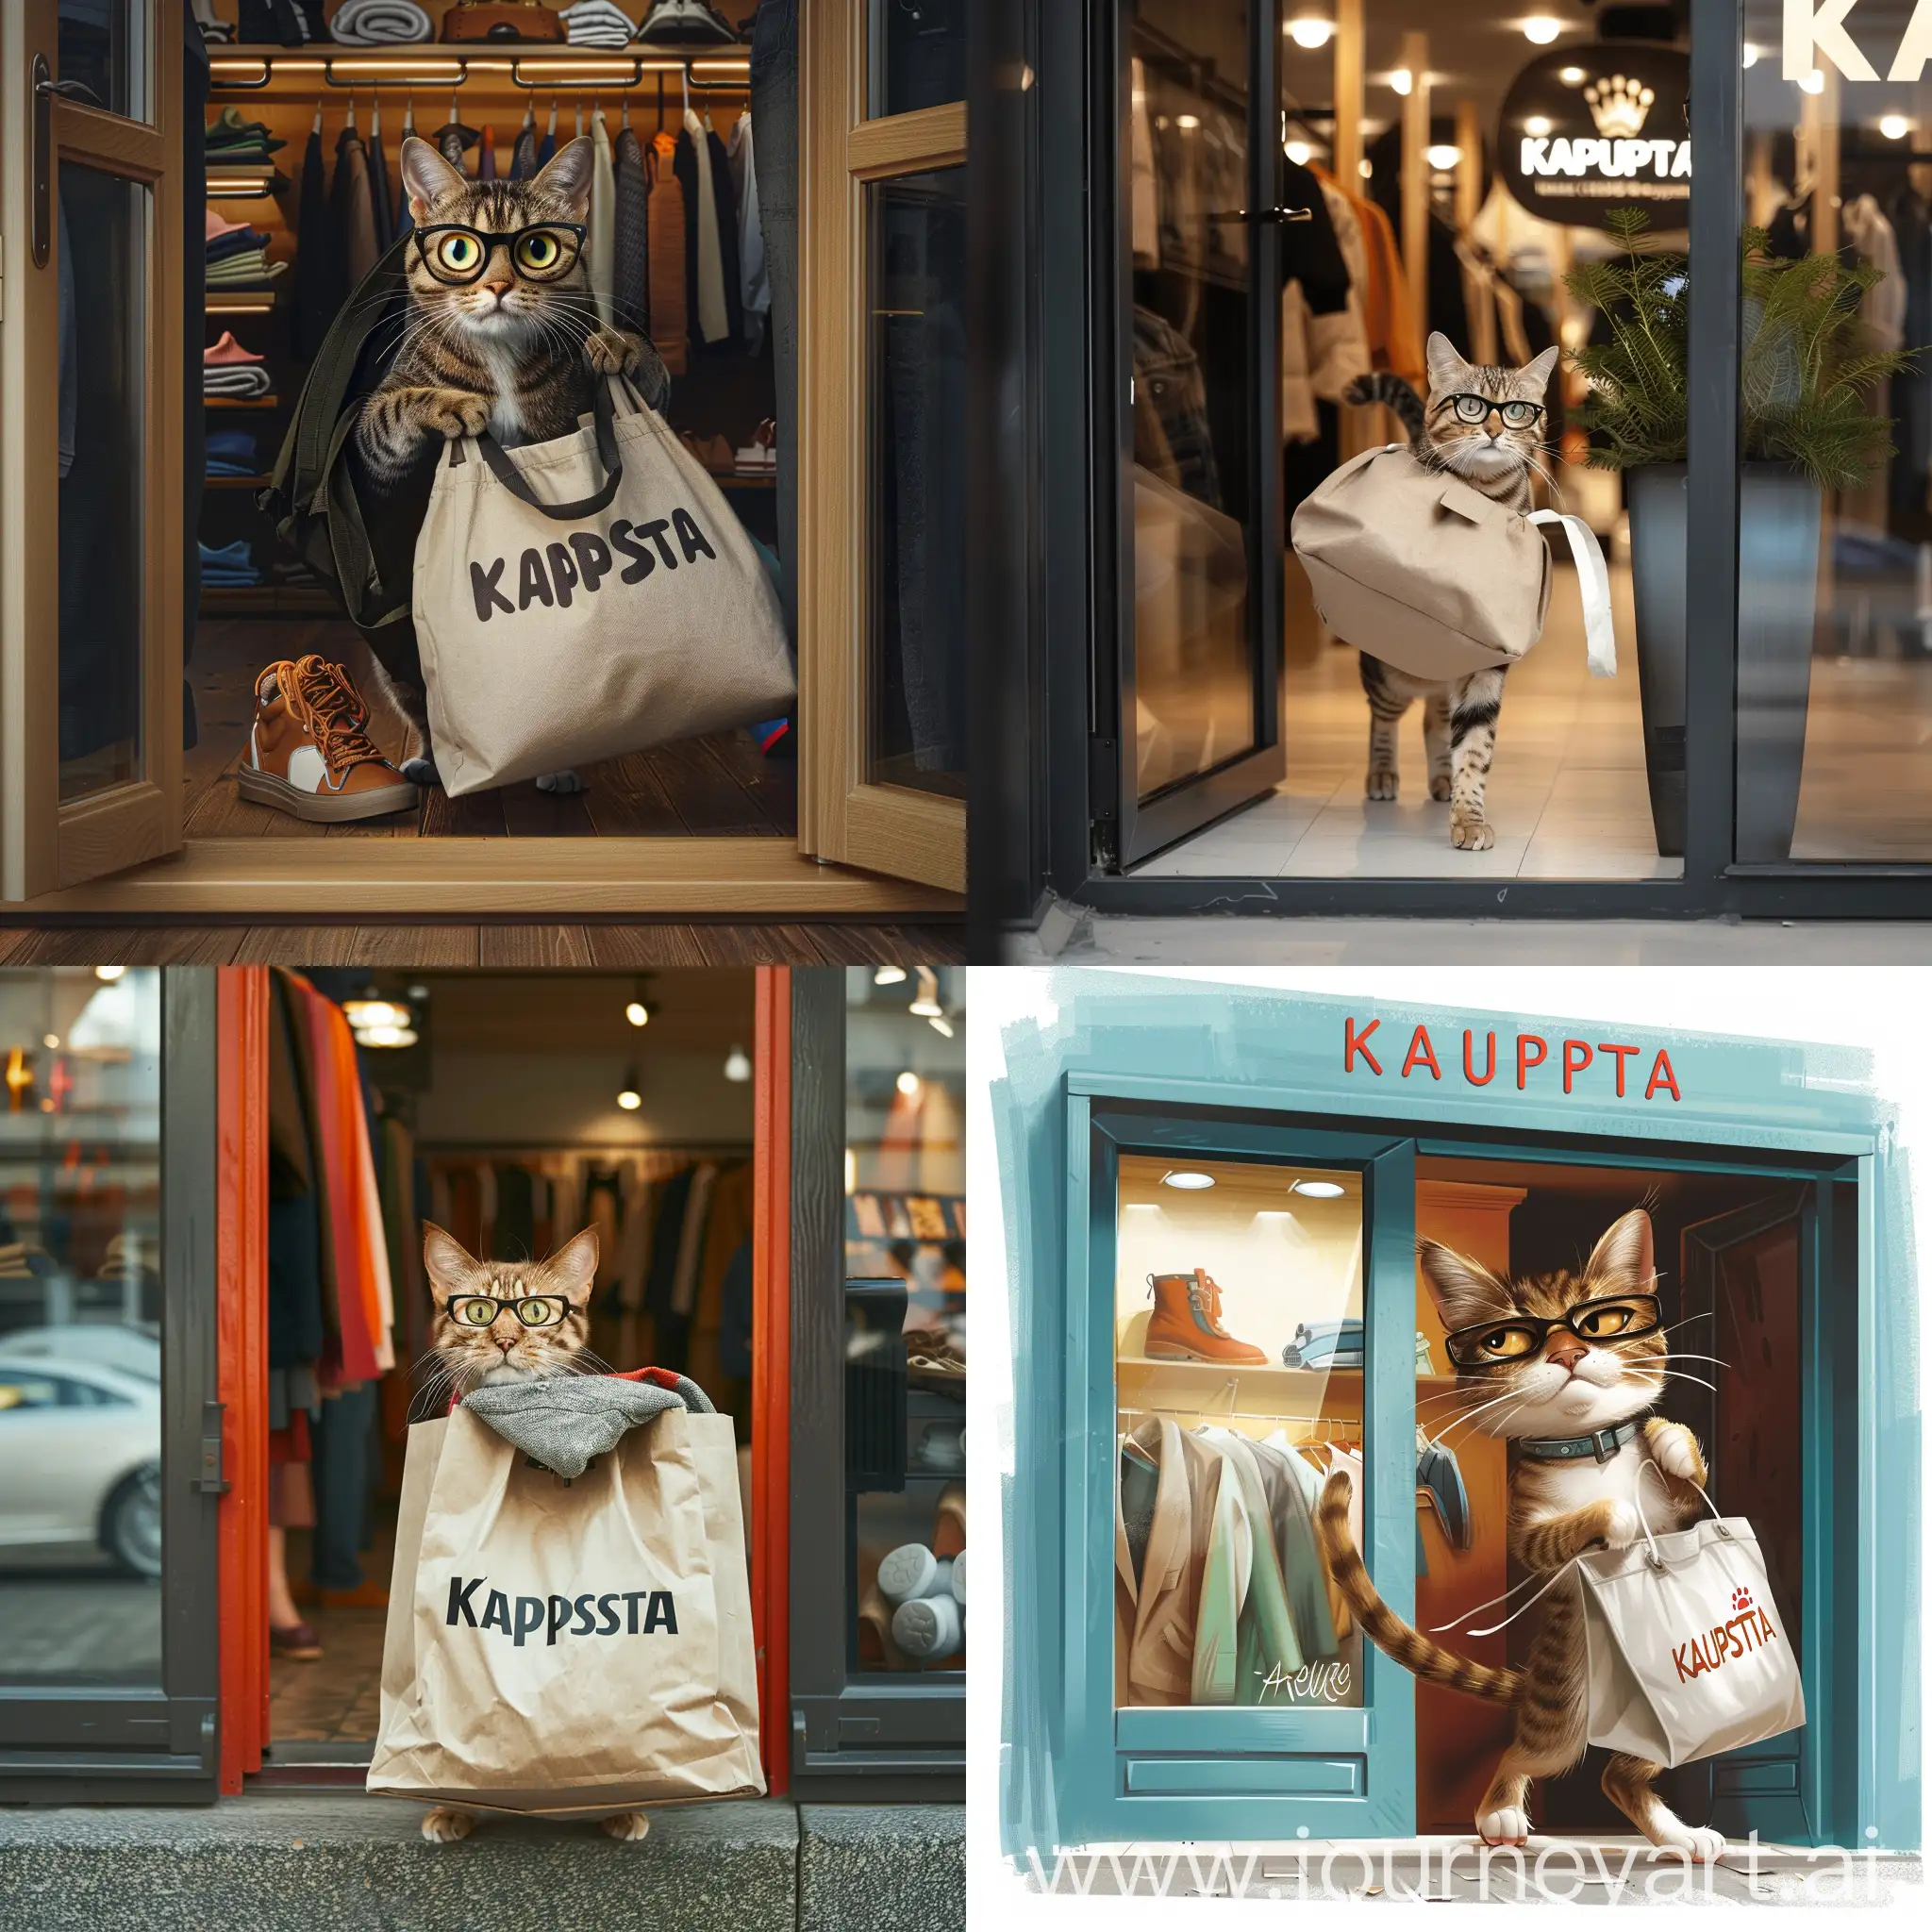 Fashionable-Cat-Exiting-Kapusta-Clothing-Store-with-Bag-of-Finds